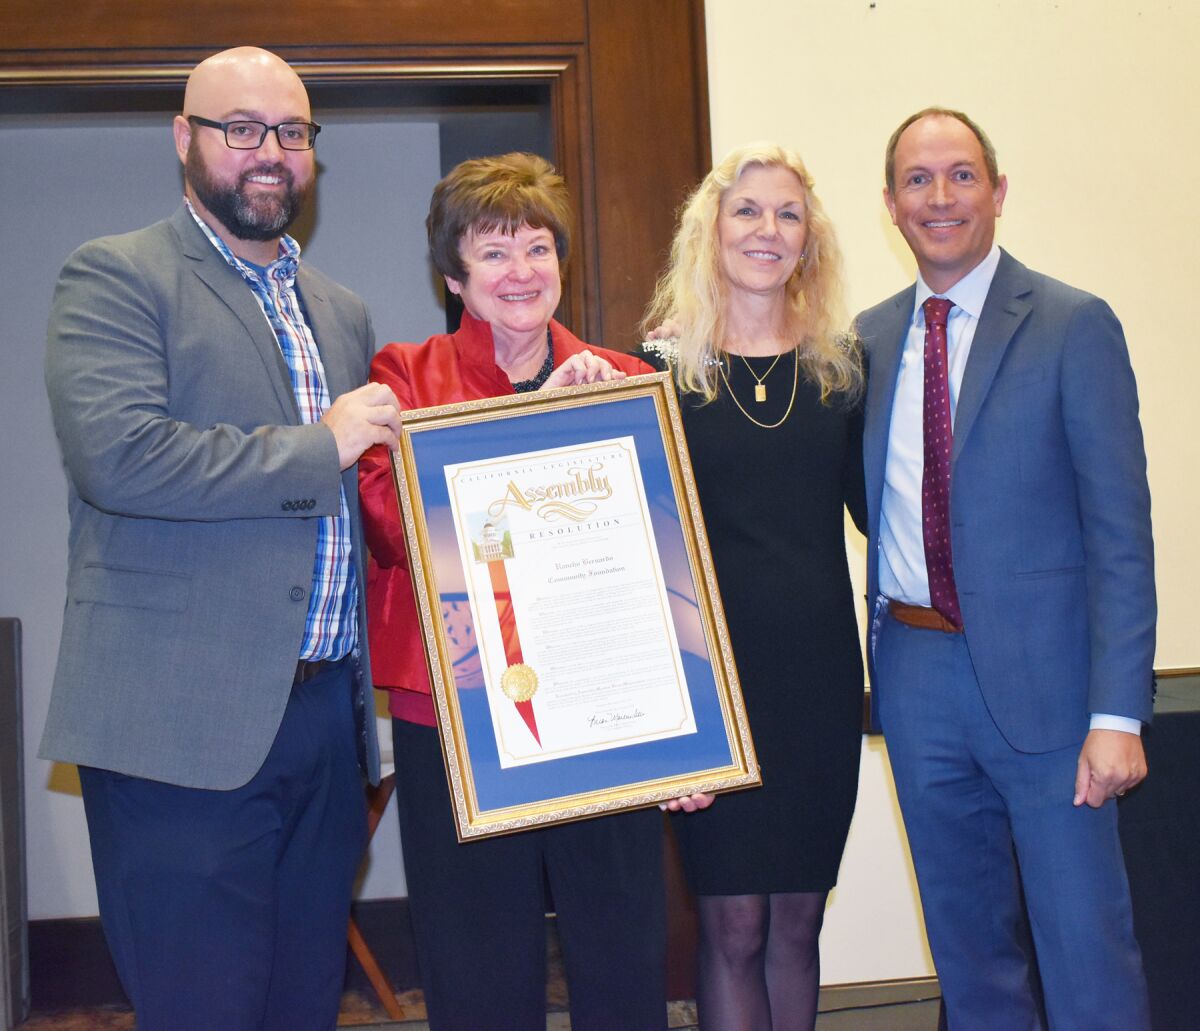 Daniel Wilson, Trudy Armstrong and Debbie Kurth accepting the award from Assemblyman Brian Maienschein.